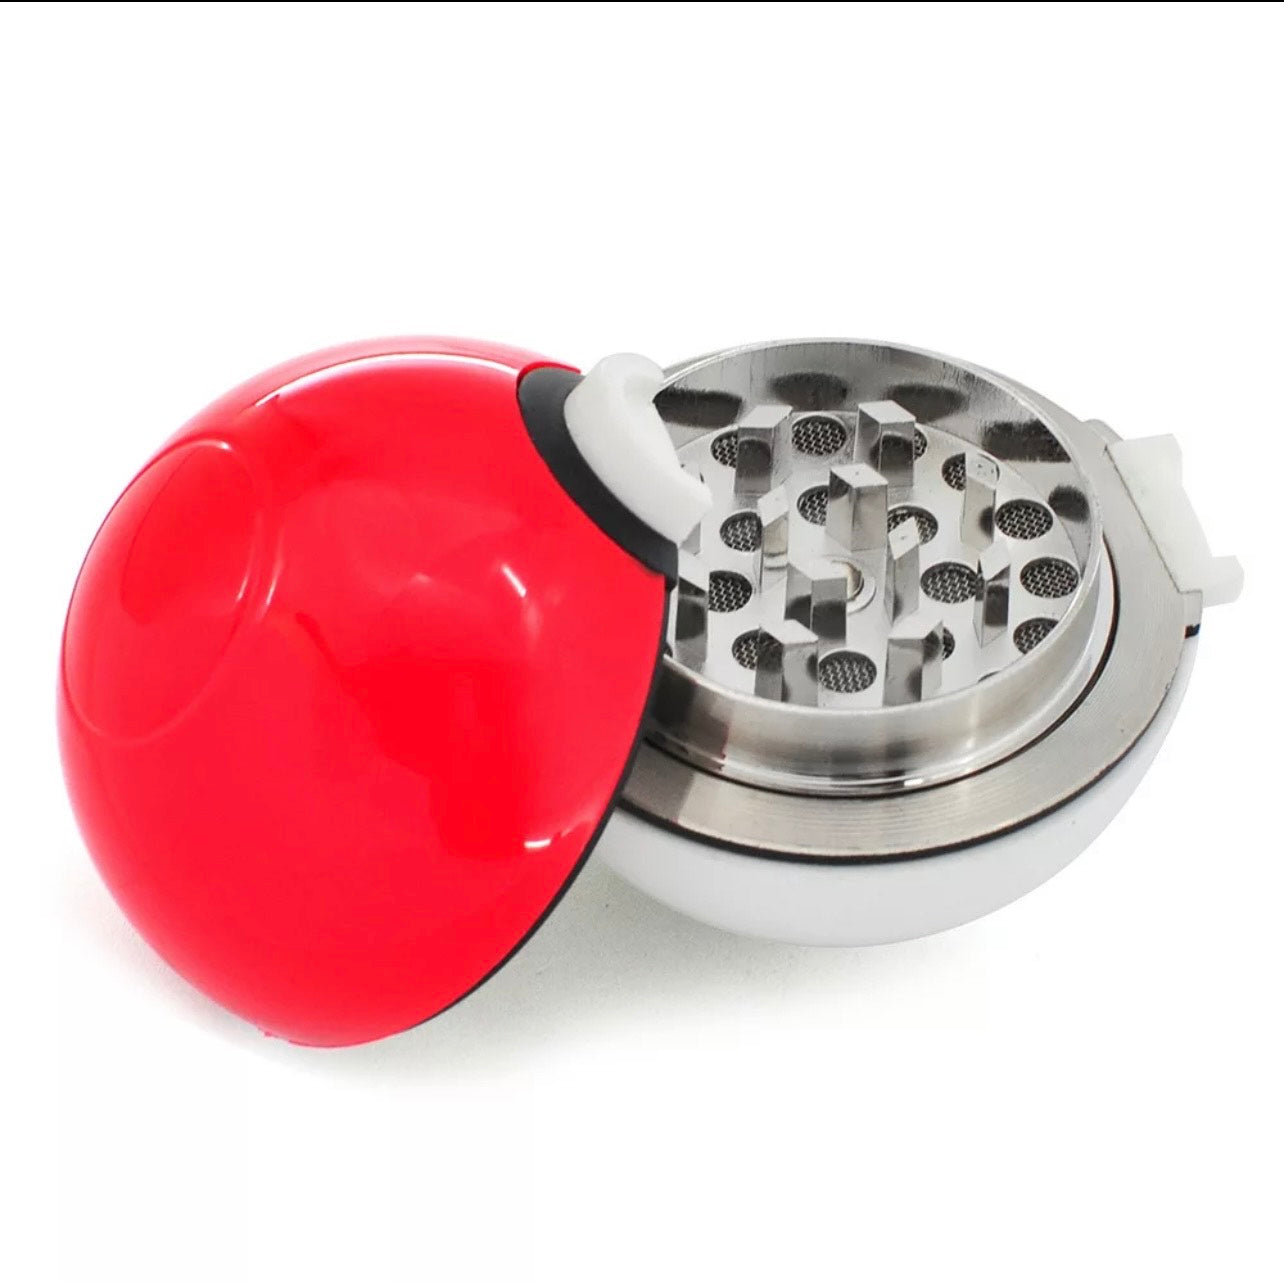 Anime Pokeball Grinder For Herbs and Spices - Pikachu Charizard gift Collectable catchem kitchen. Crusher